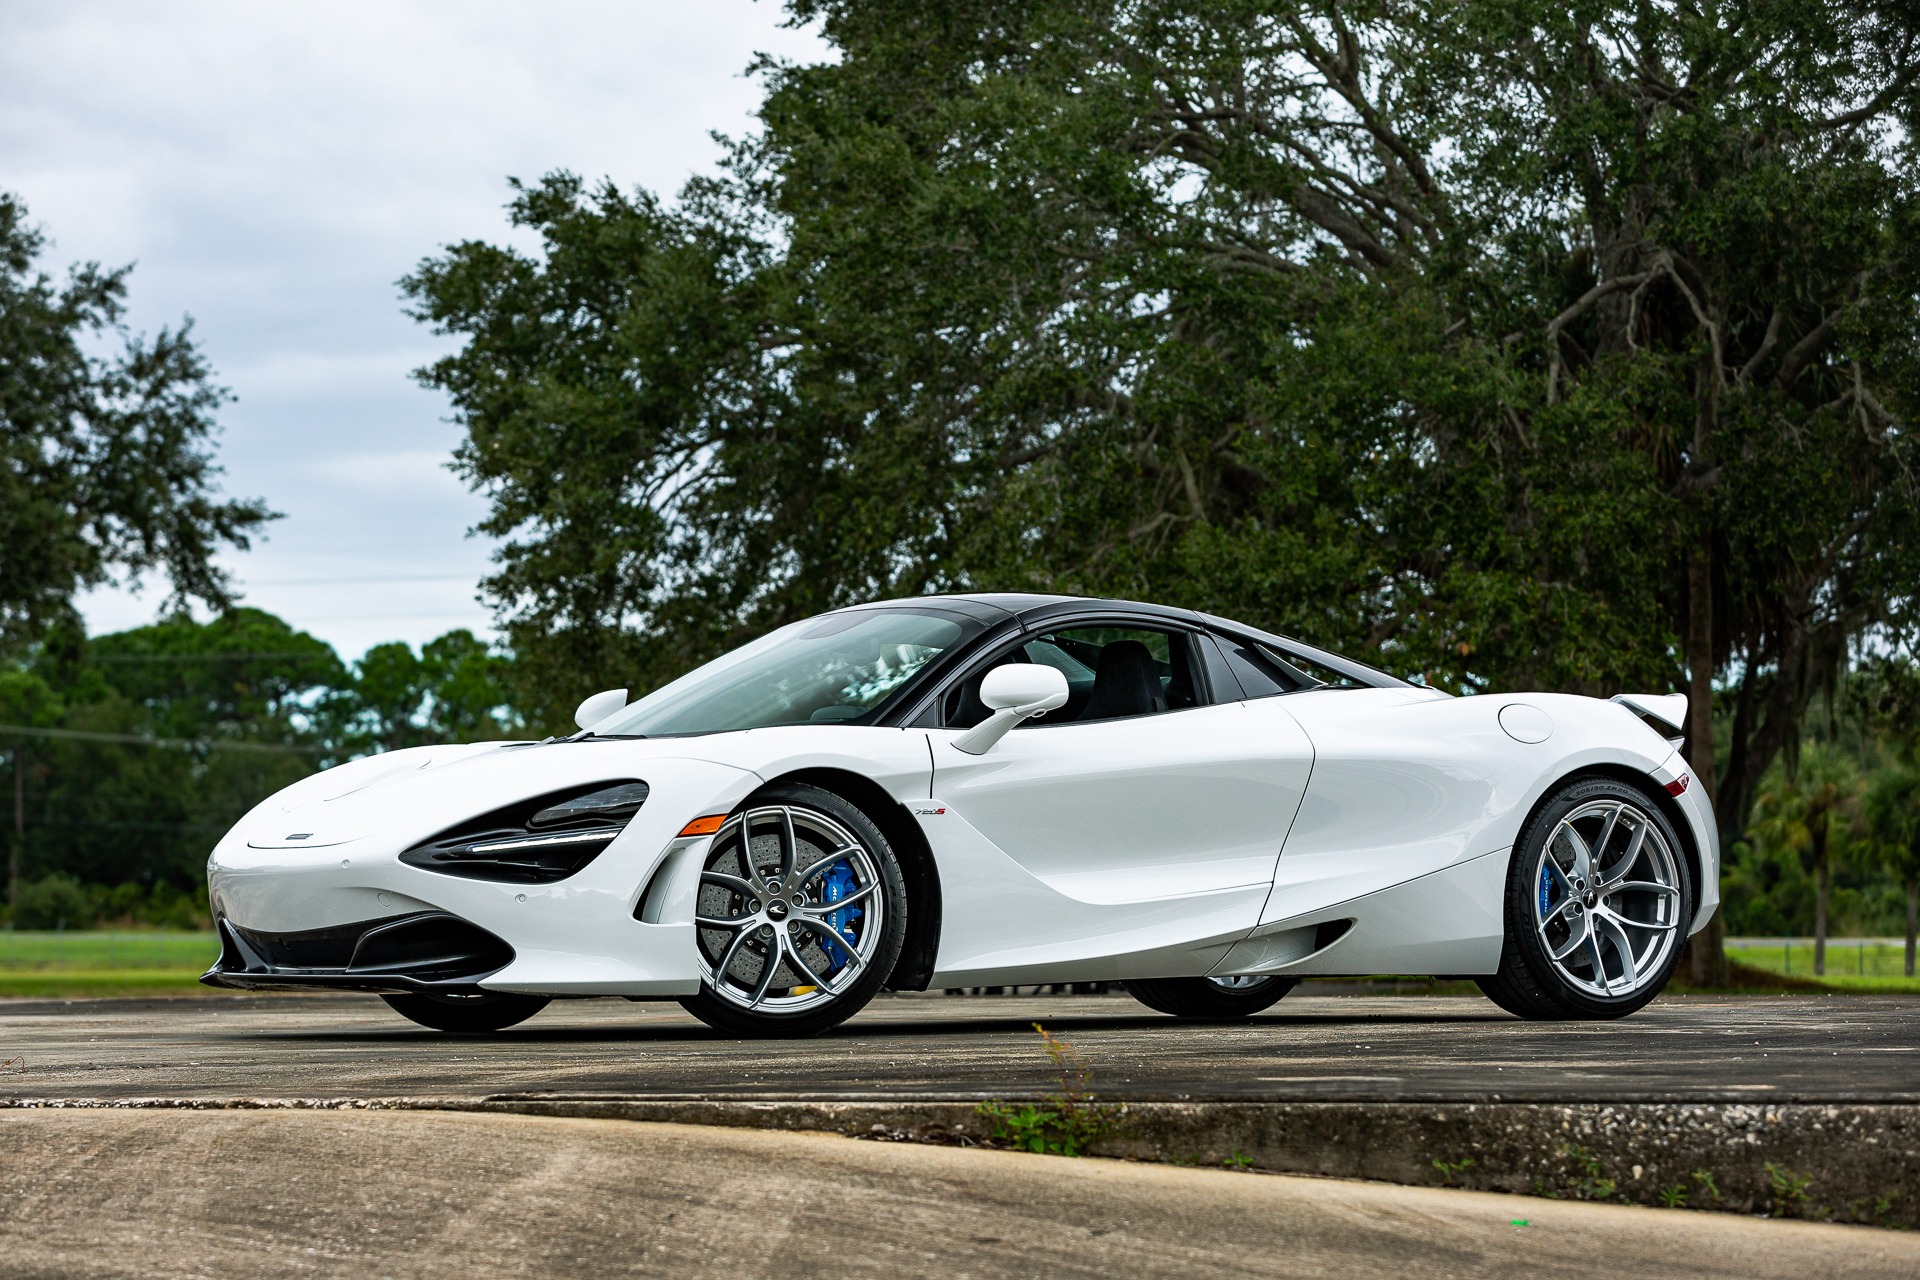 Used 2020 McLaren 720S Spider Base For Sale ($319,880)